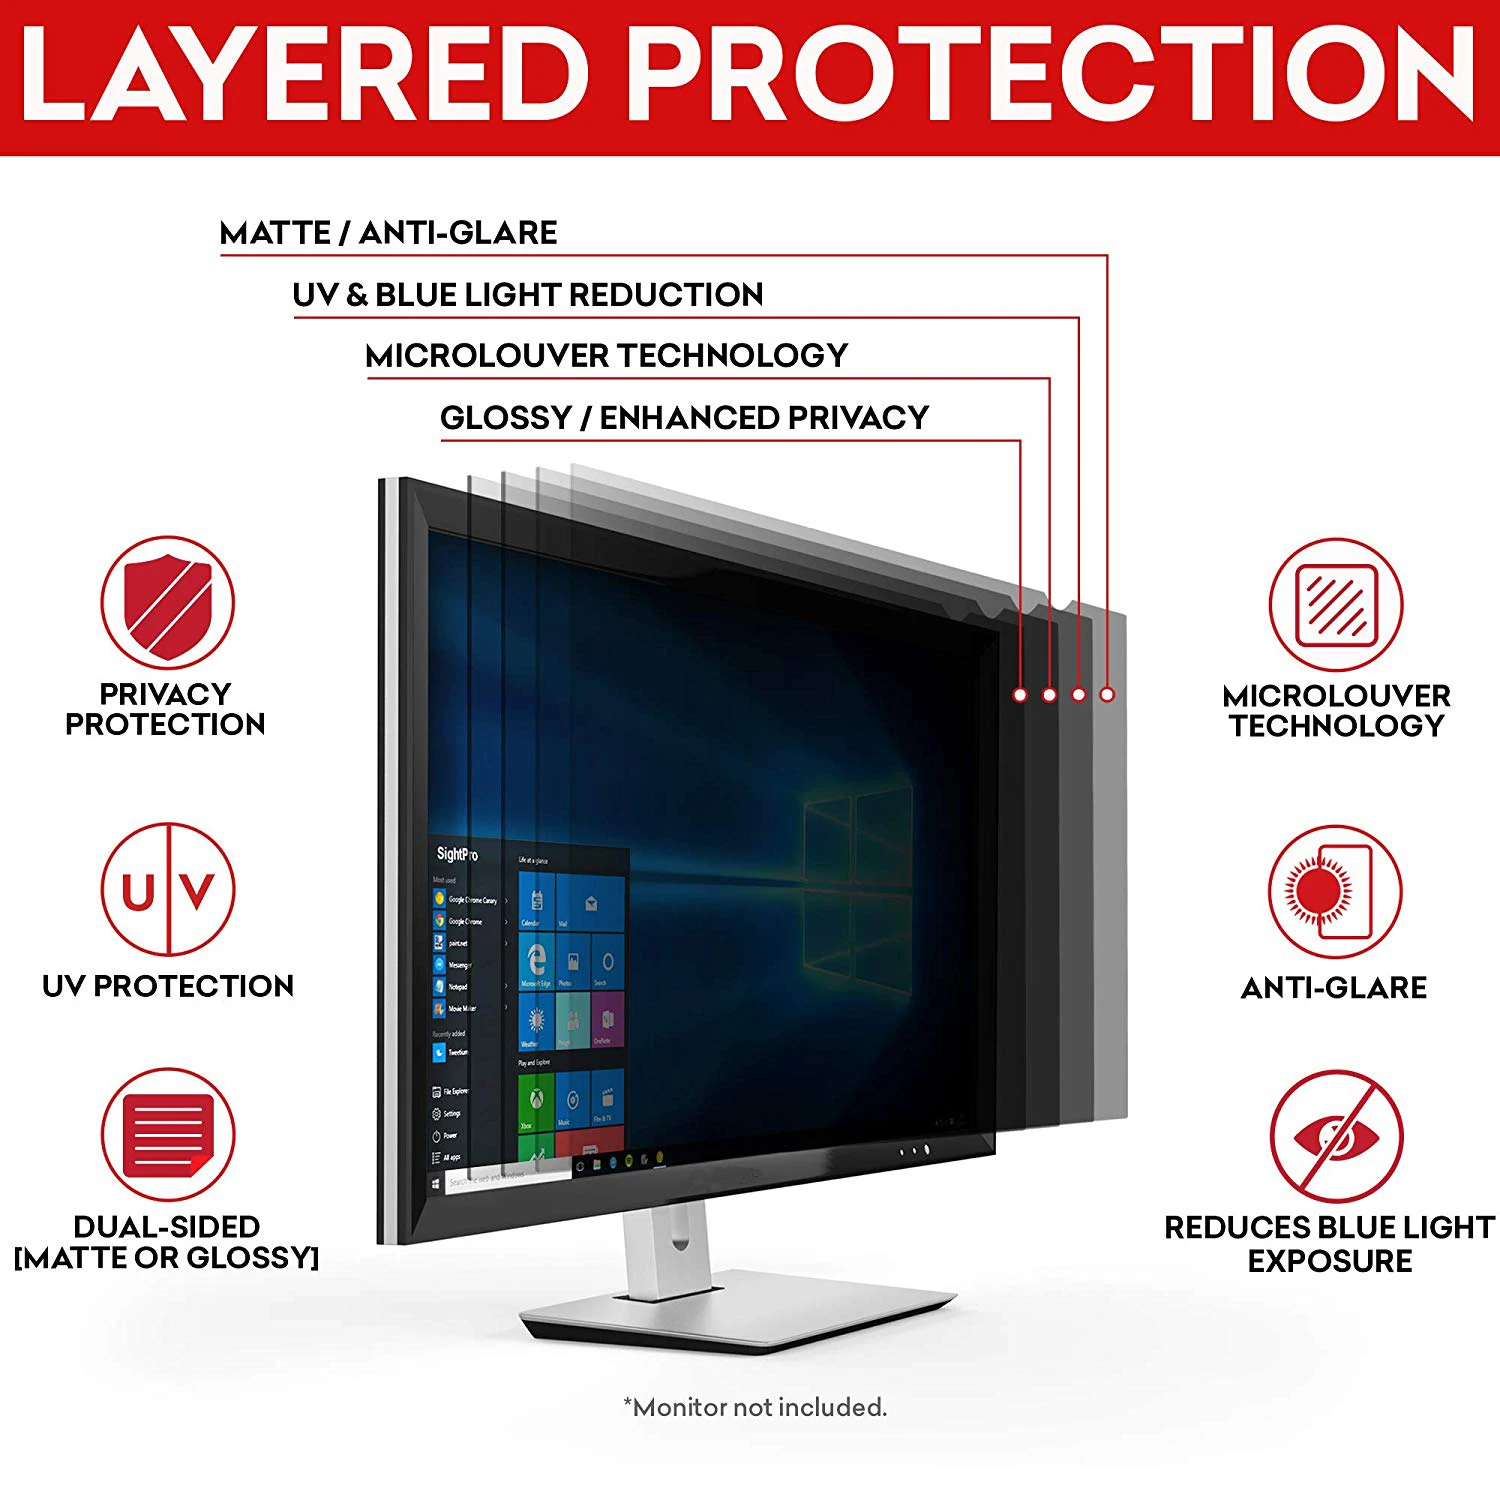 Custom Size Privacy Filter Anti-Glare LCD Screen Protective film For Computer Notebook PC Monitors